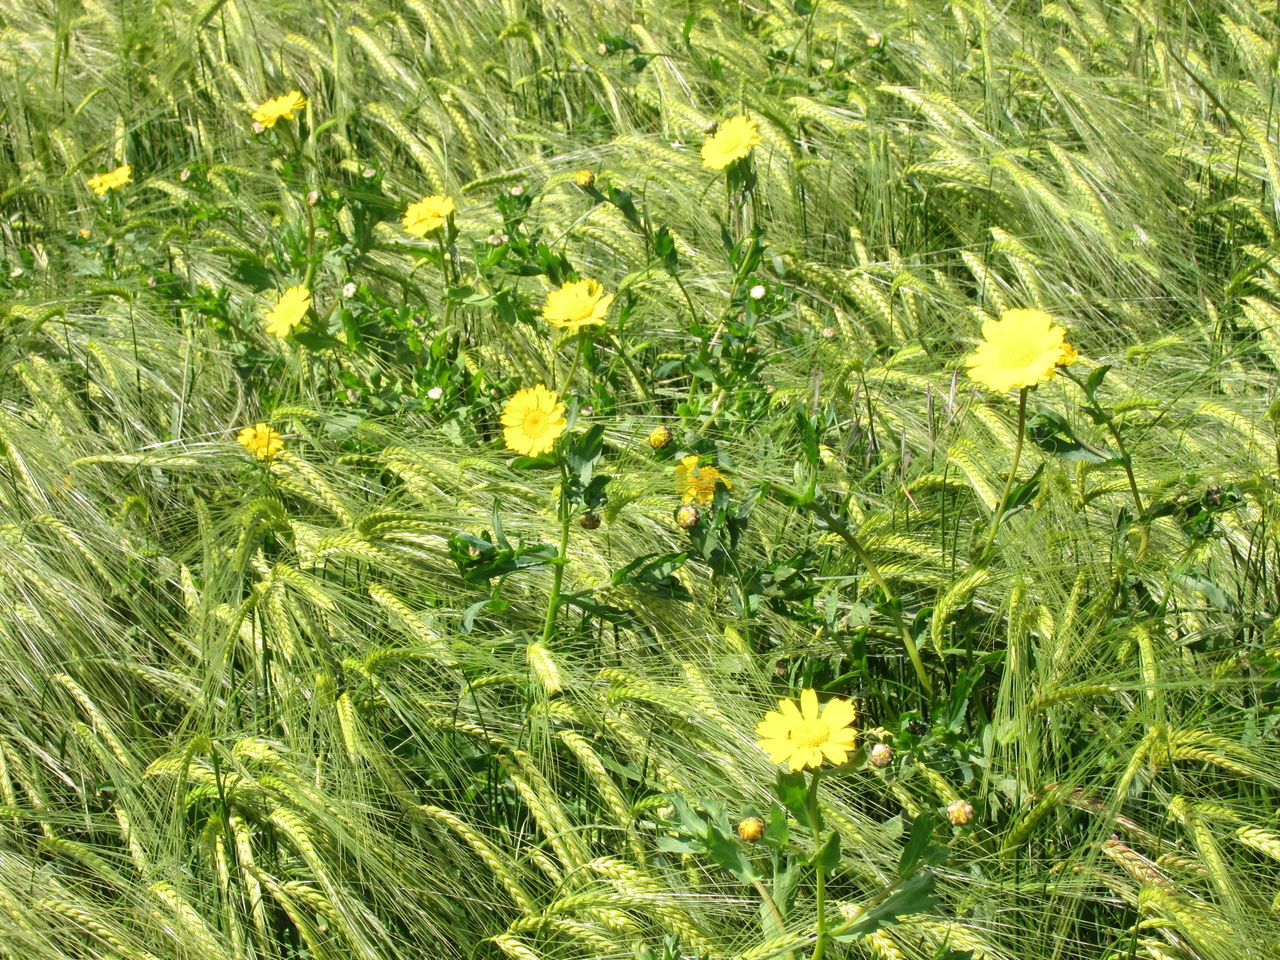 CLOSE-UP OF YELLOW FLOWER GROWING ON FIELD